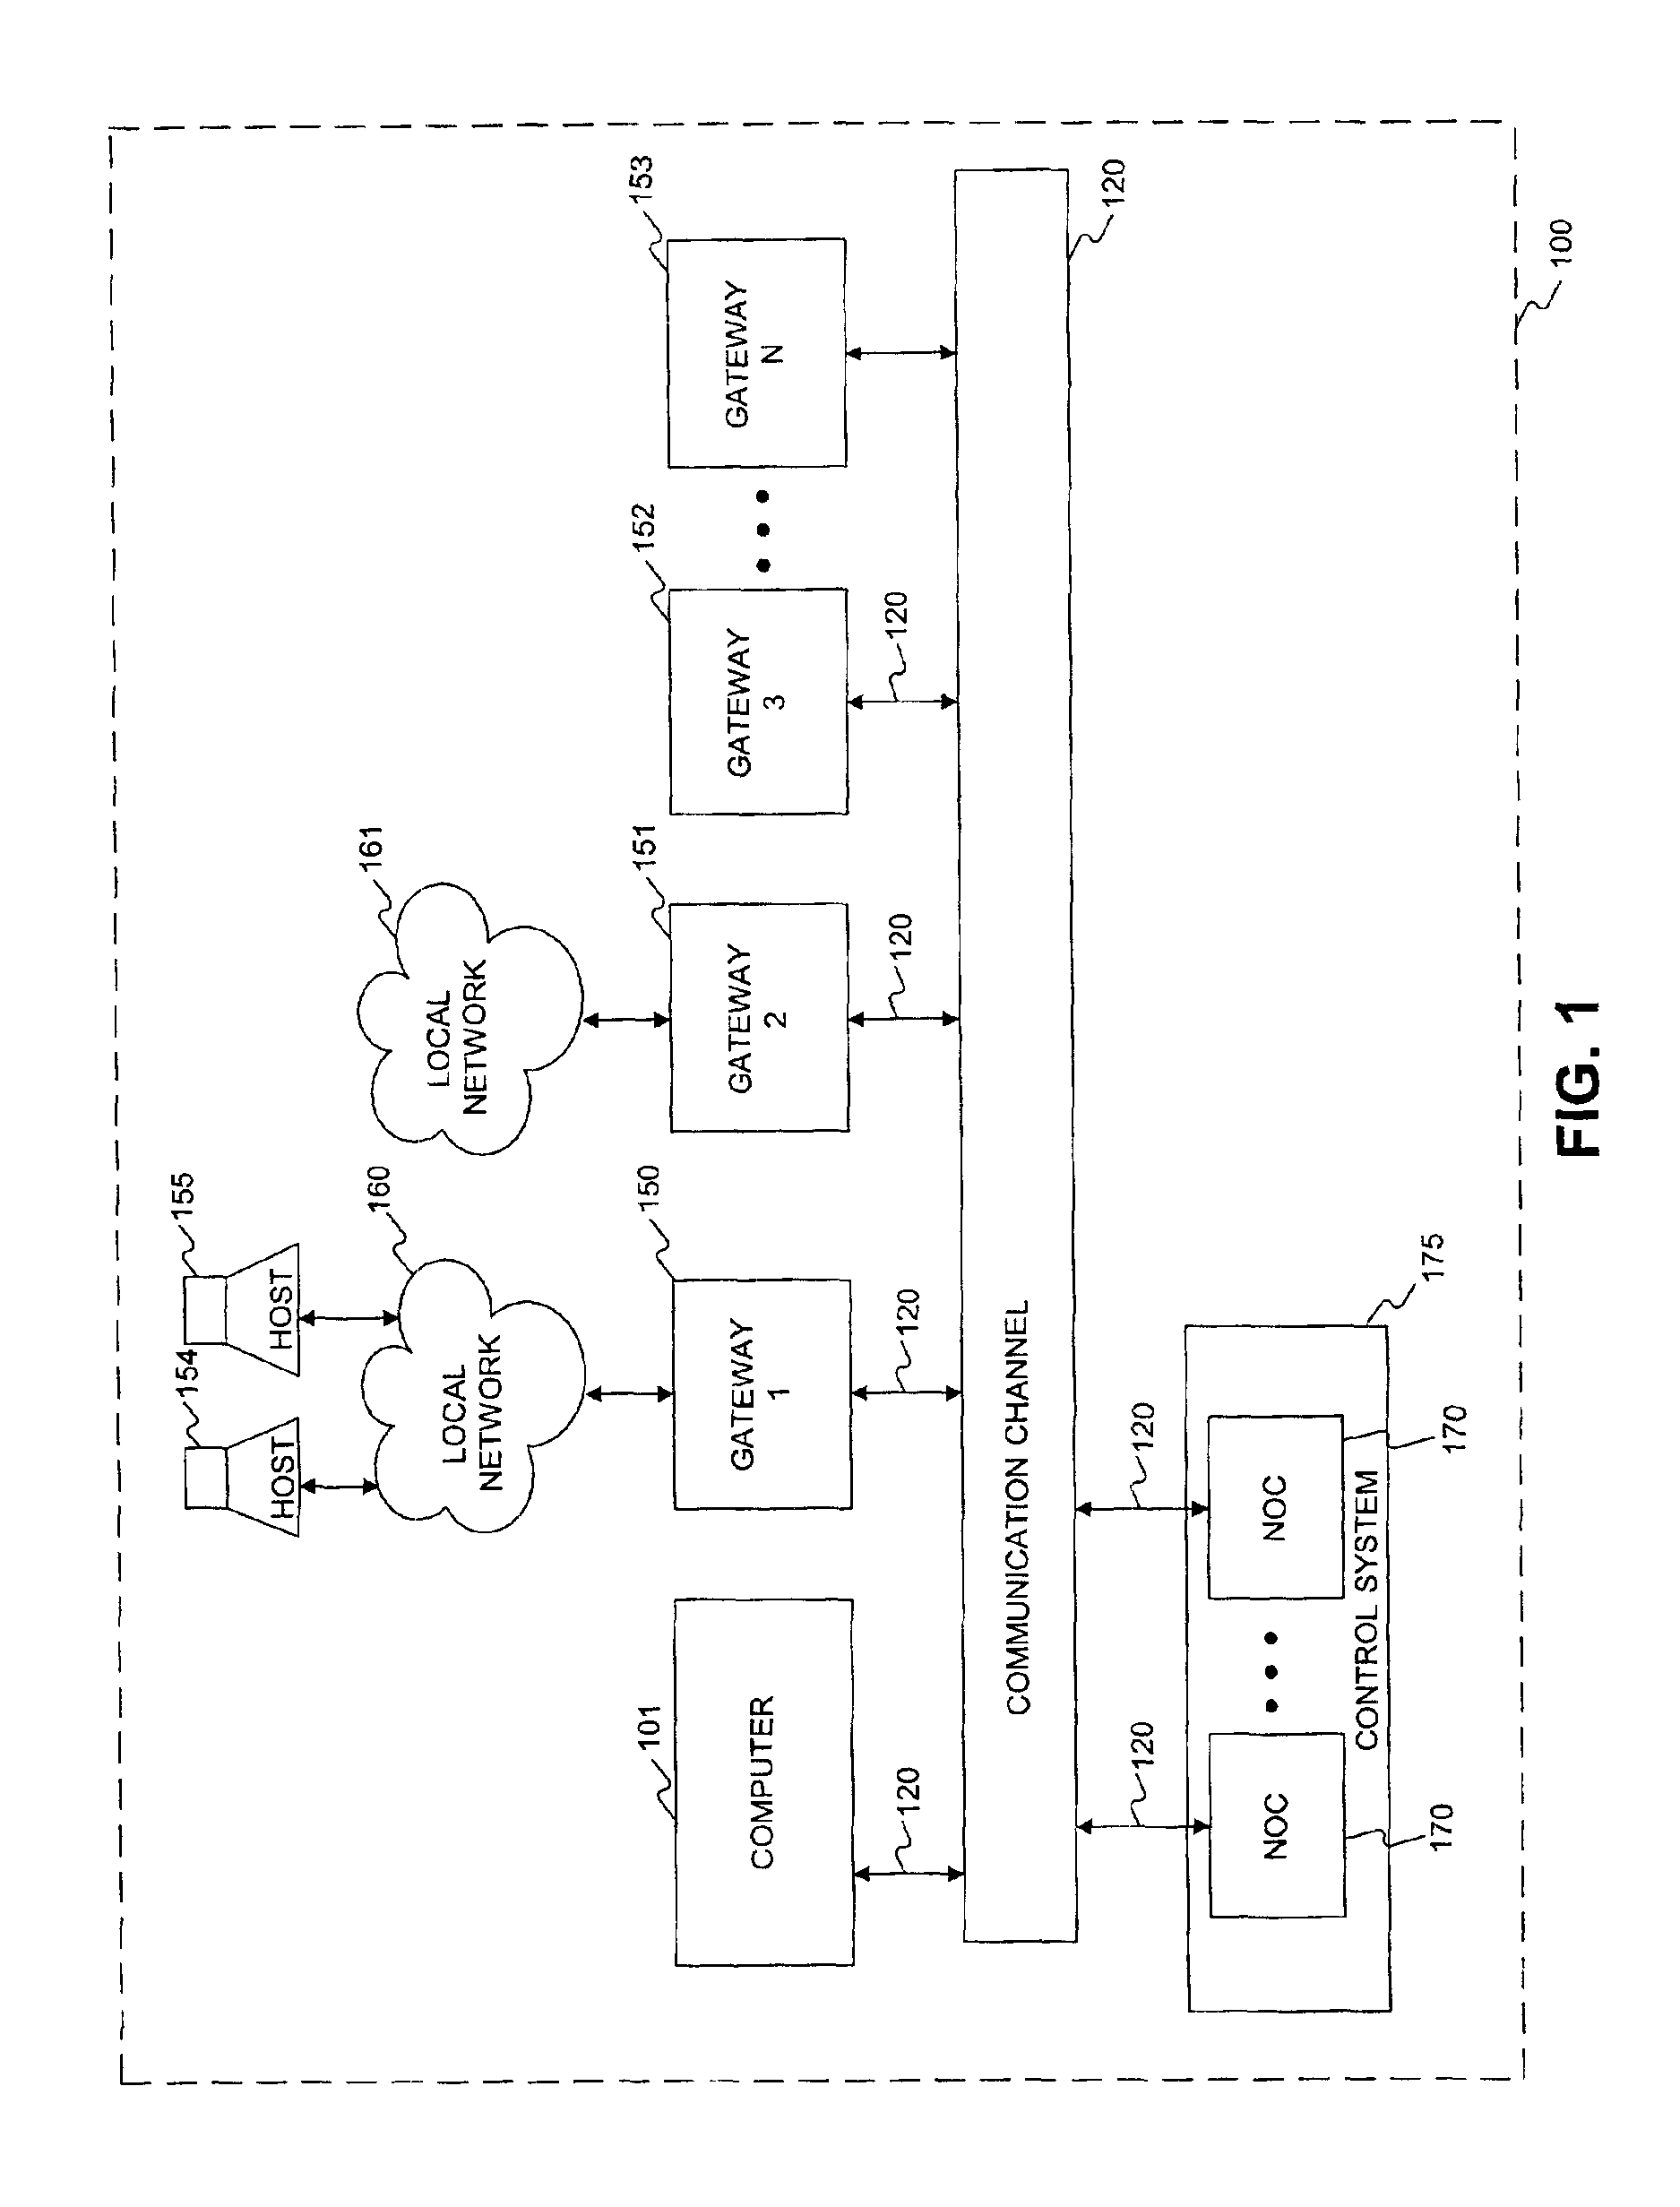 Methods and systems for enabling communication between a processor and a network operations center